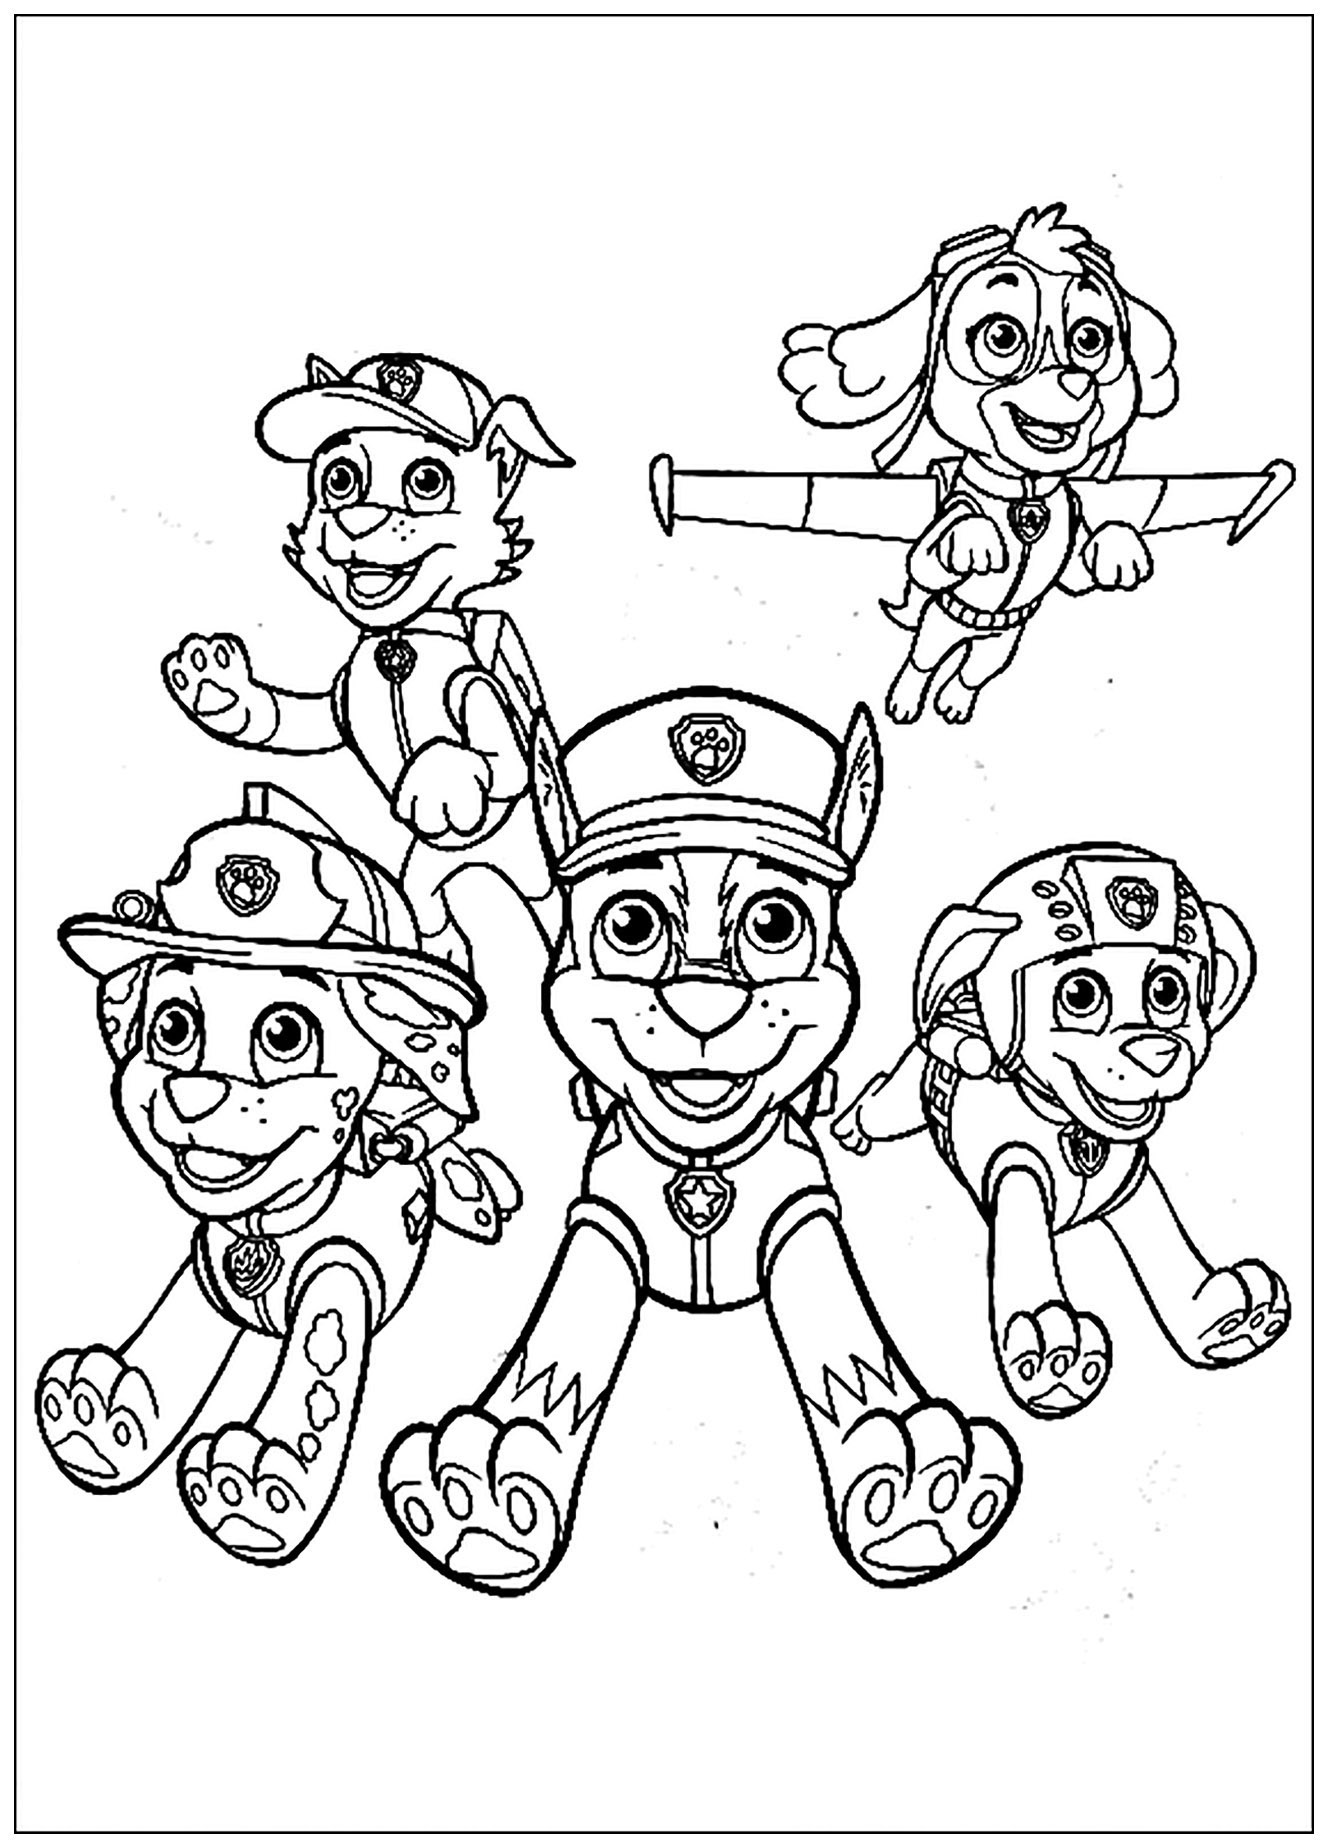 Color this beautiful Patrol coloring page with your favorite colors